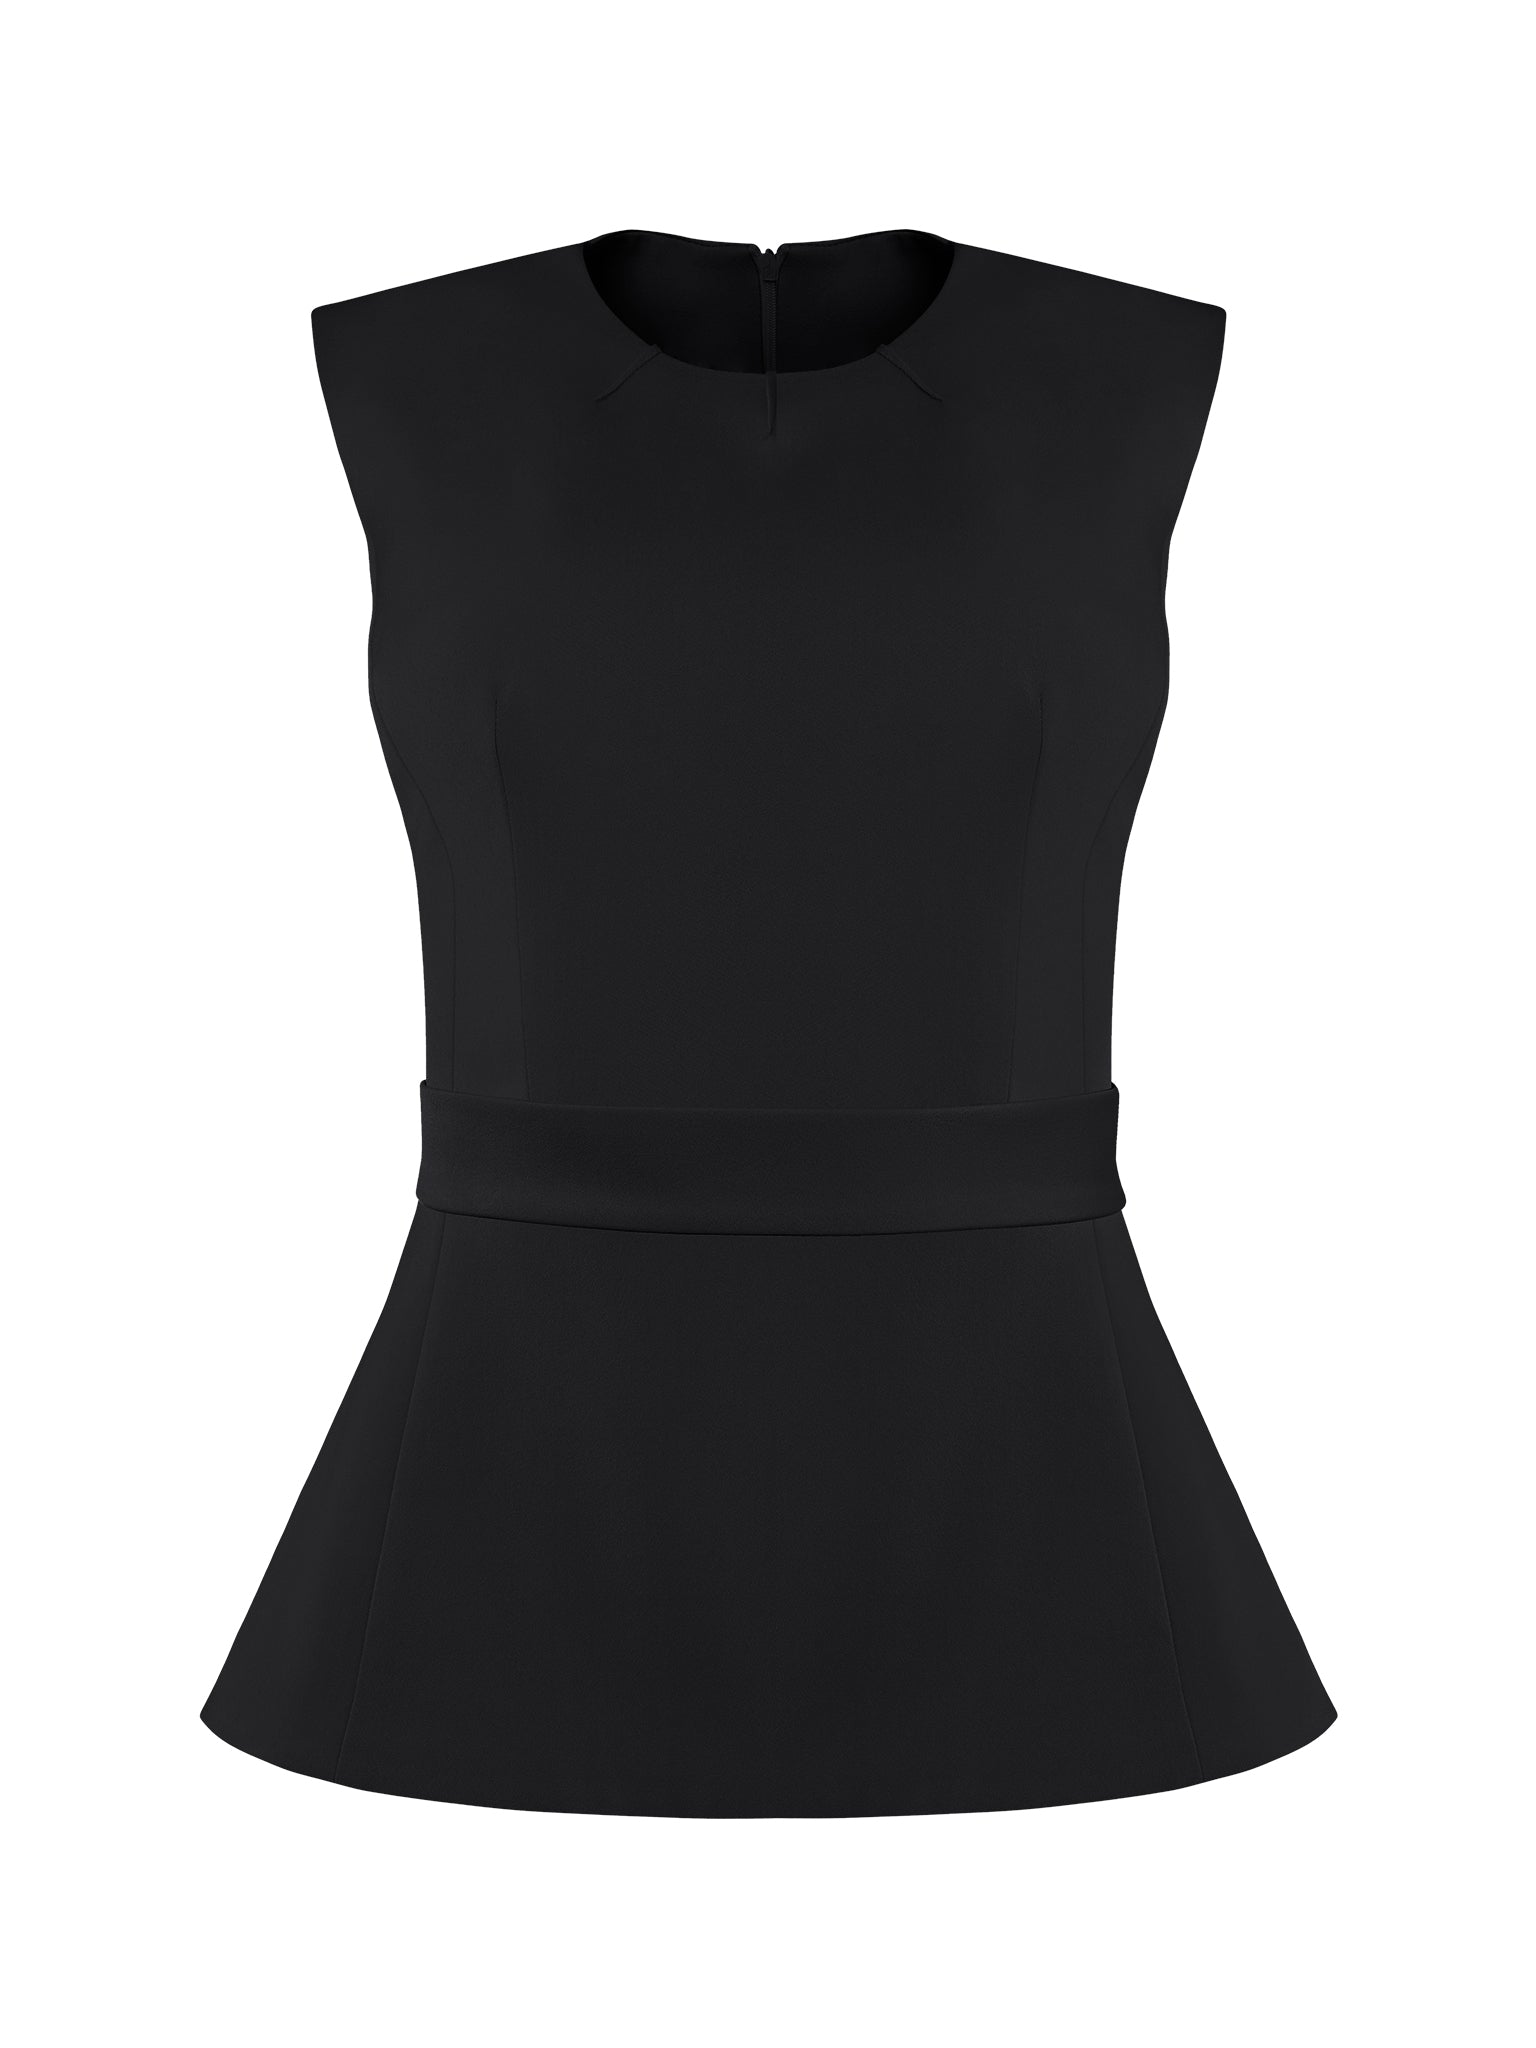 Magnetic Power Sleeveless Waist-Fitted Top by Tia Dorraine Women's Luxury Fashion Designer Clothing Brand